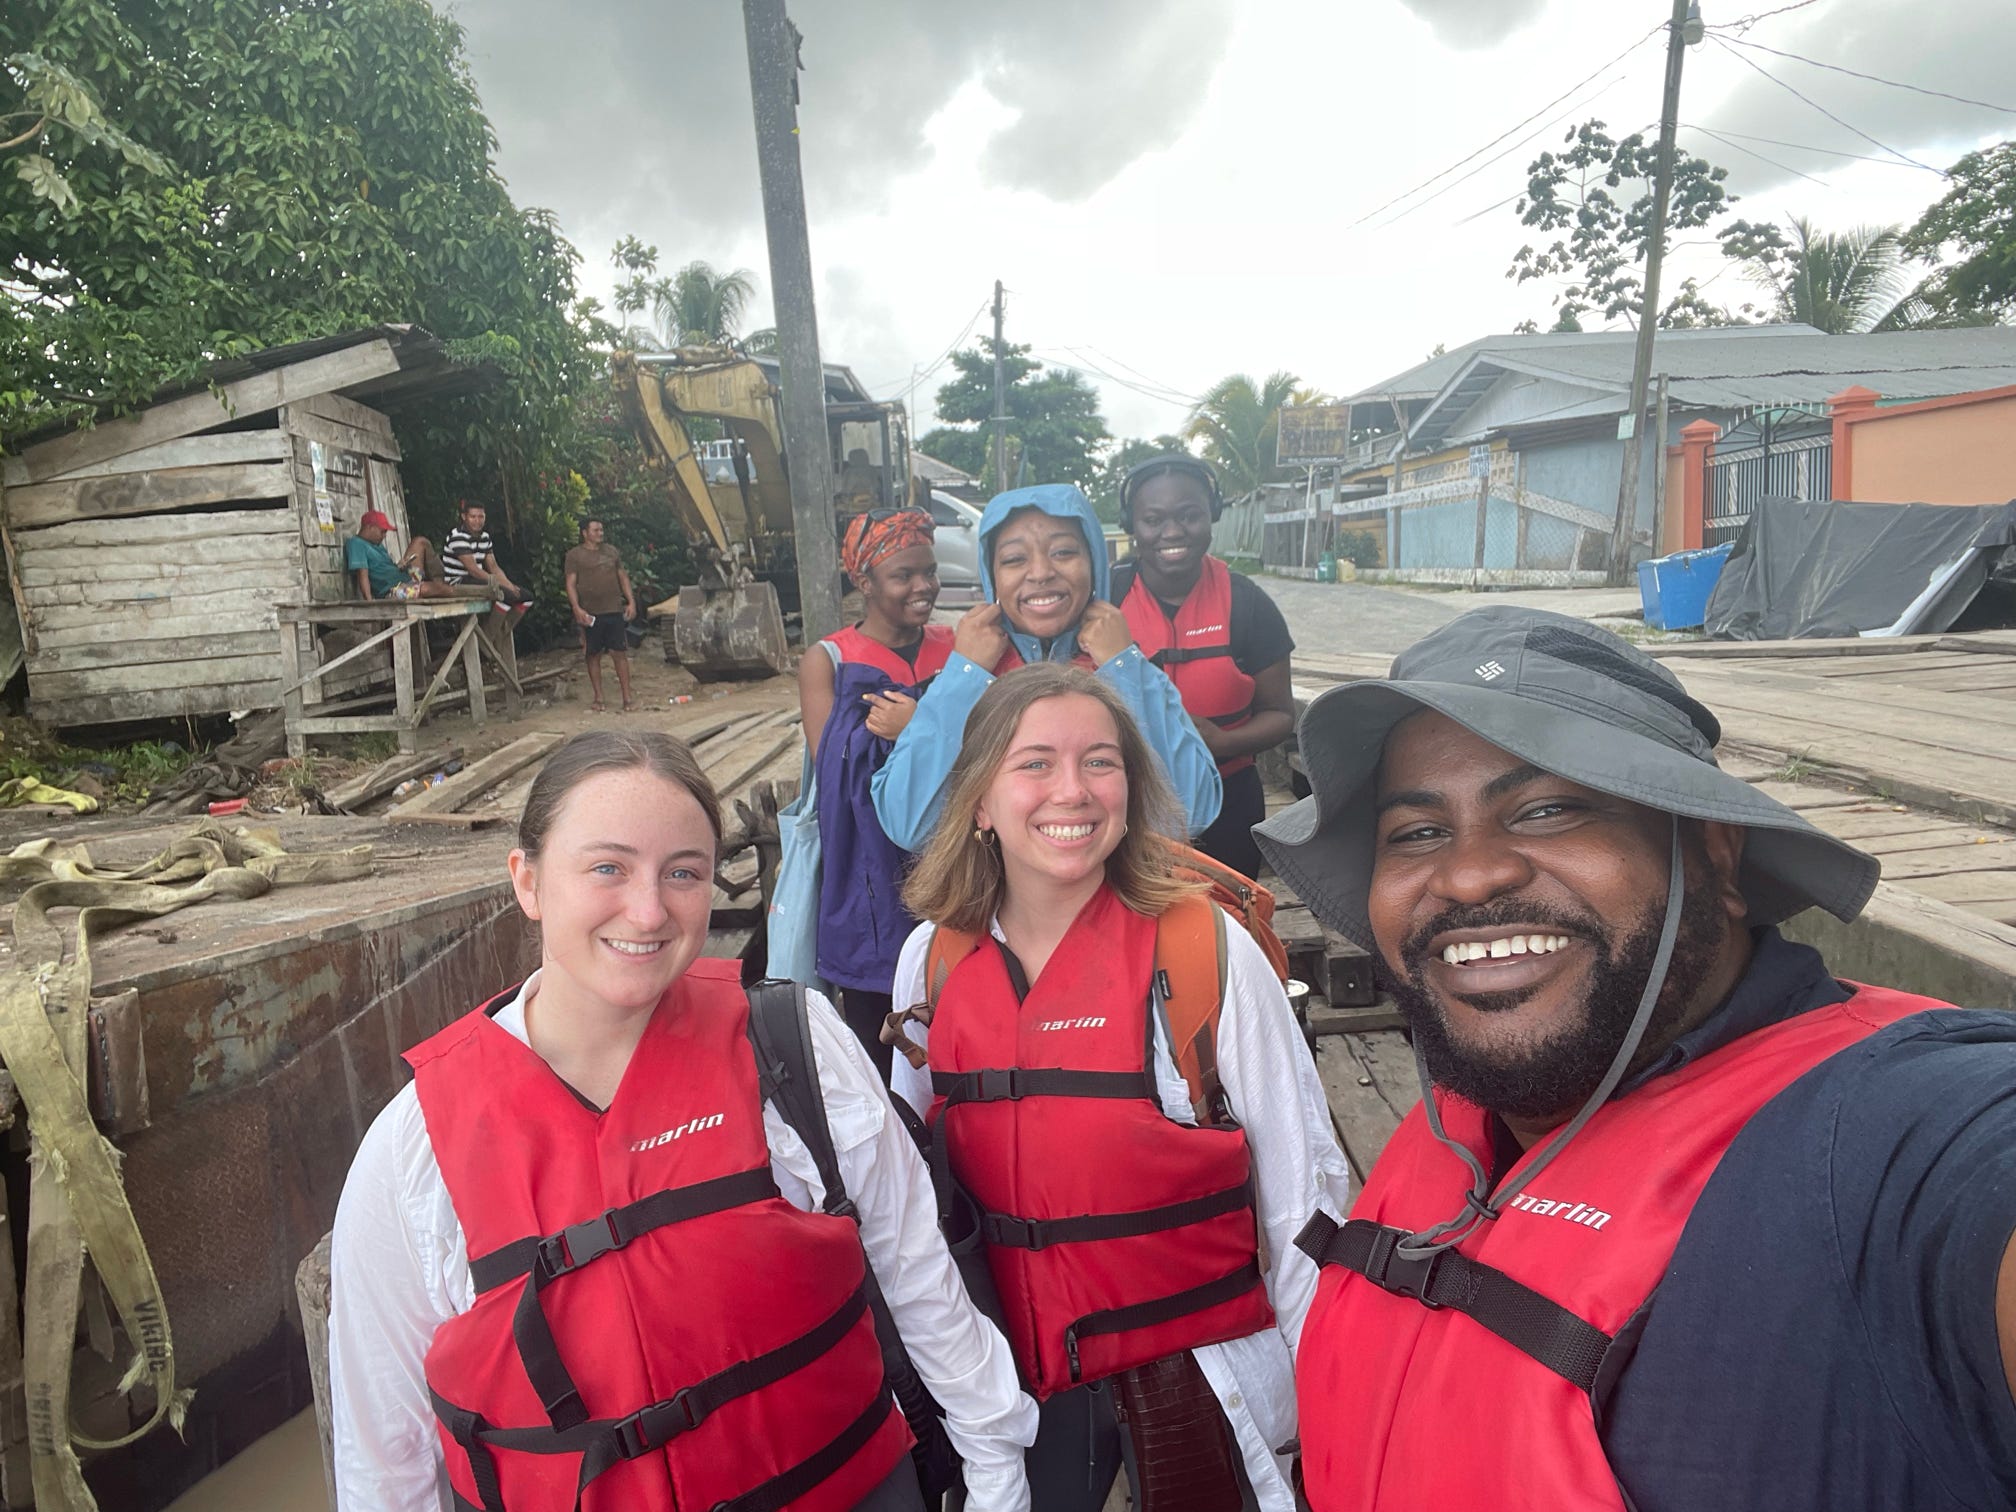 Students pose in life jackets in a Guyanan village